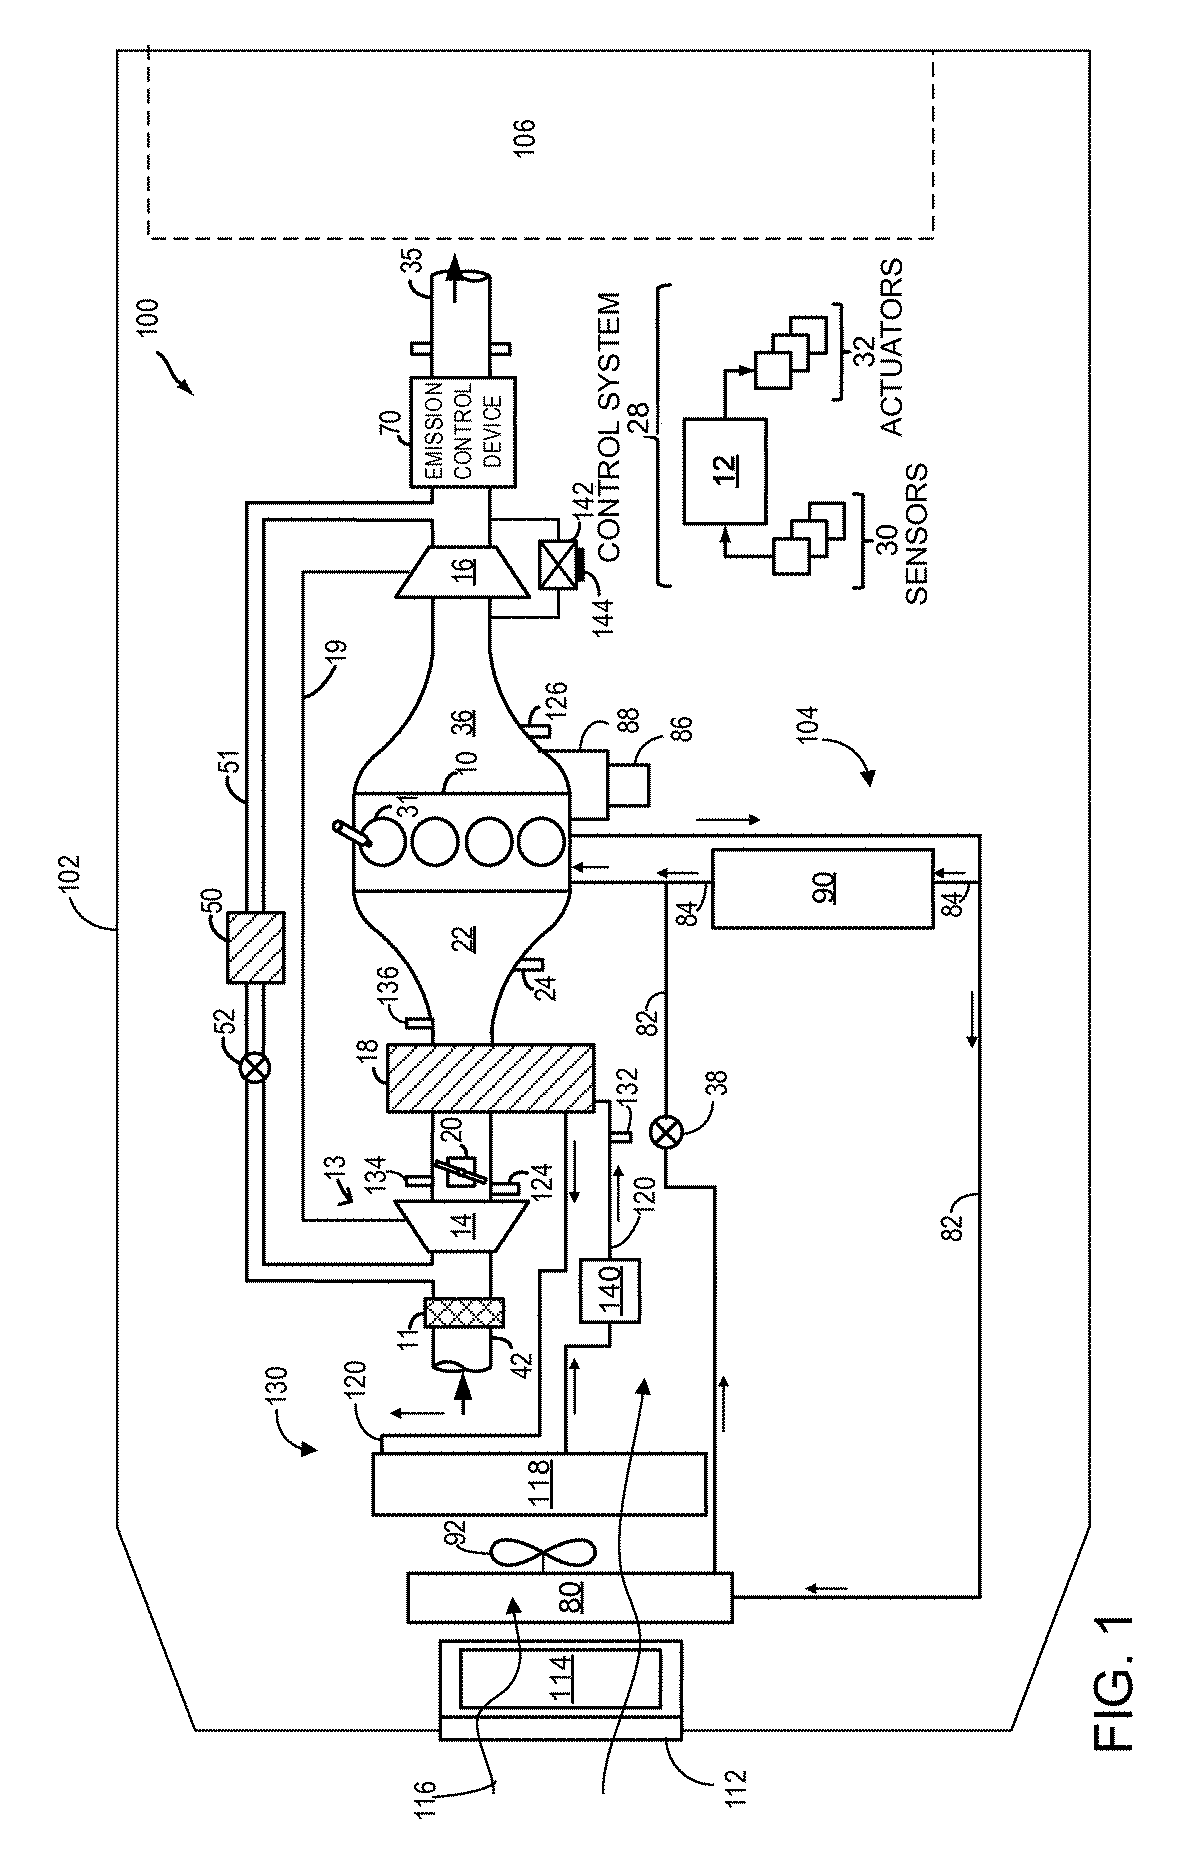 System and method for a turbocharger driven coolant pump